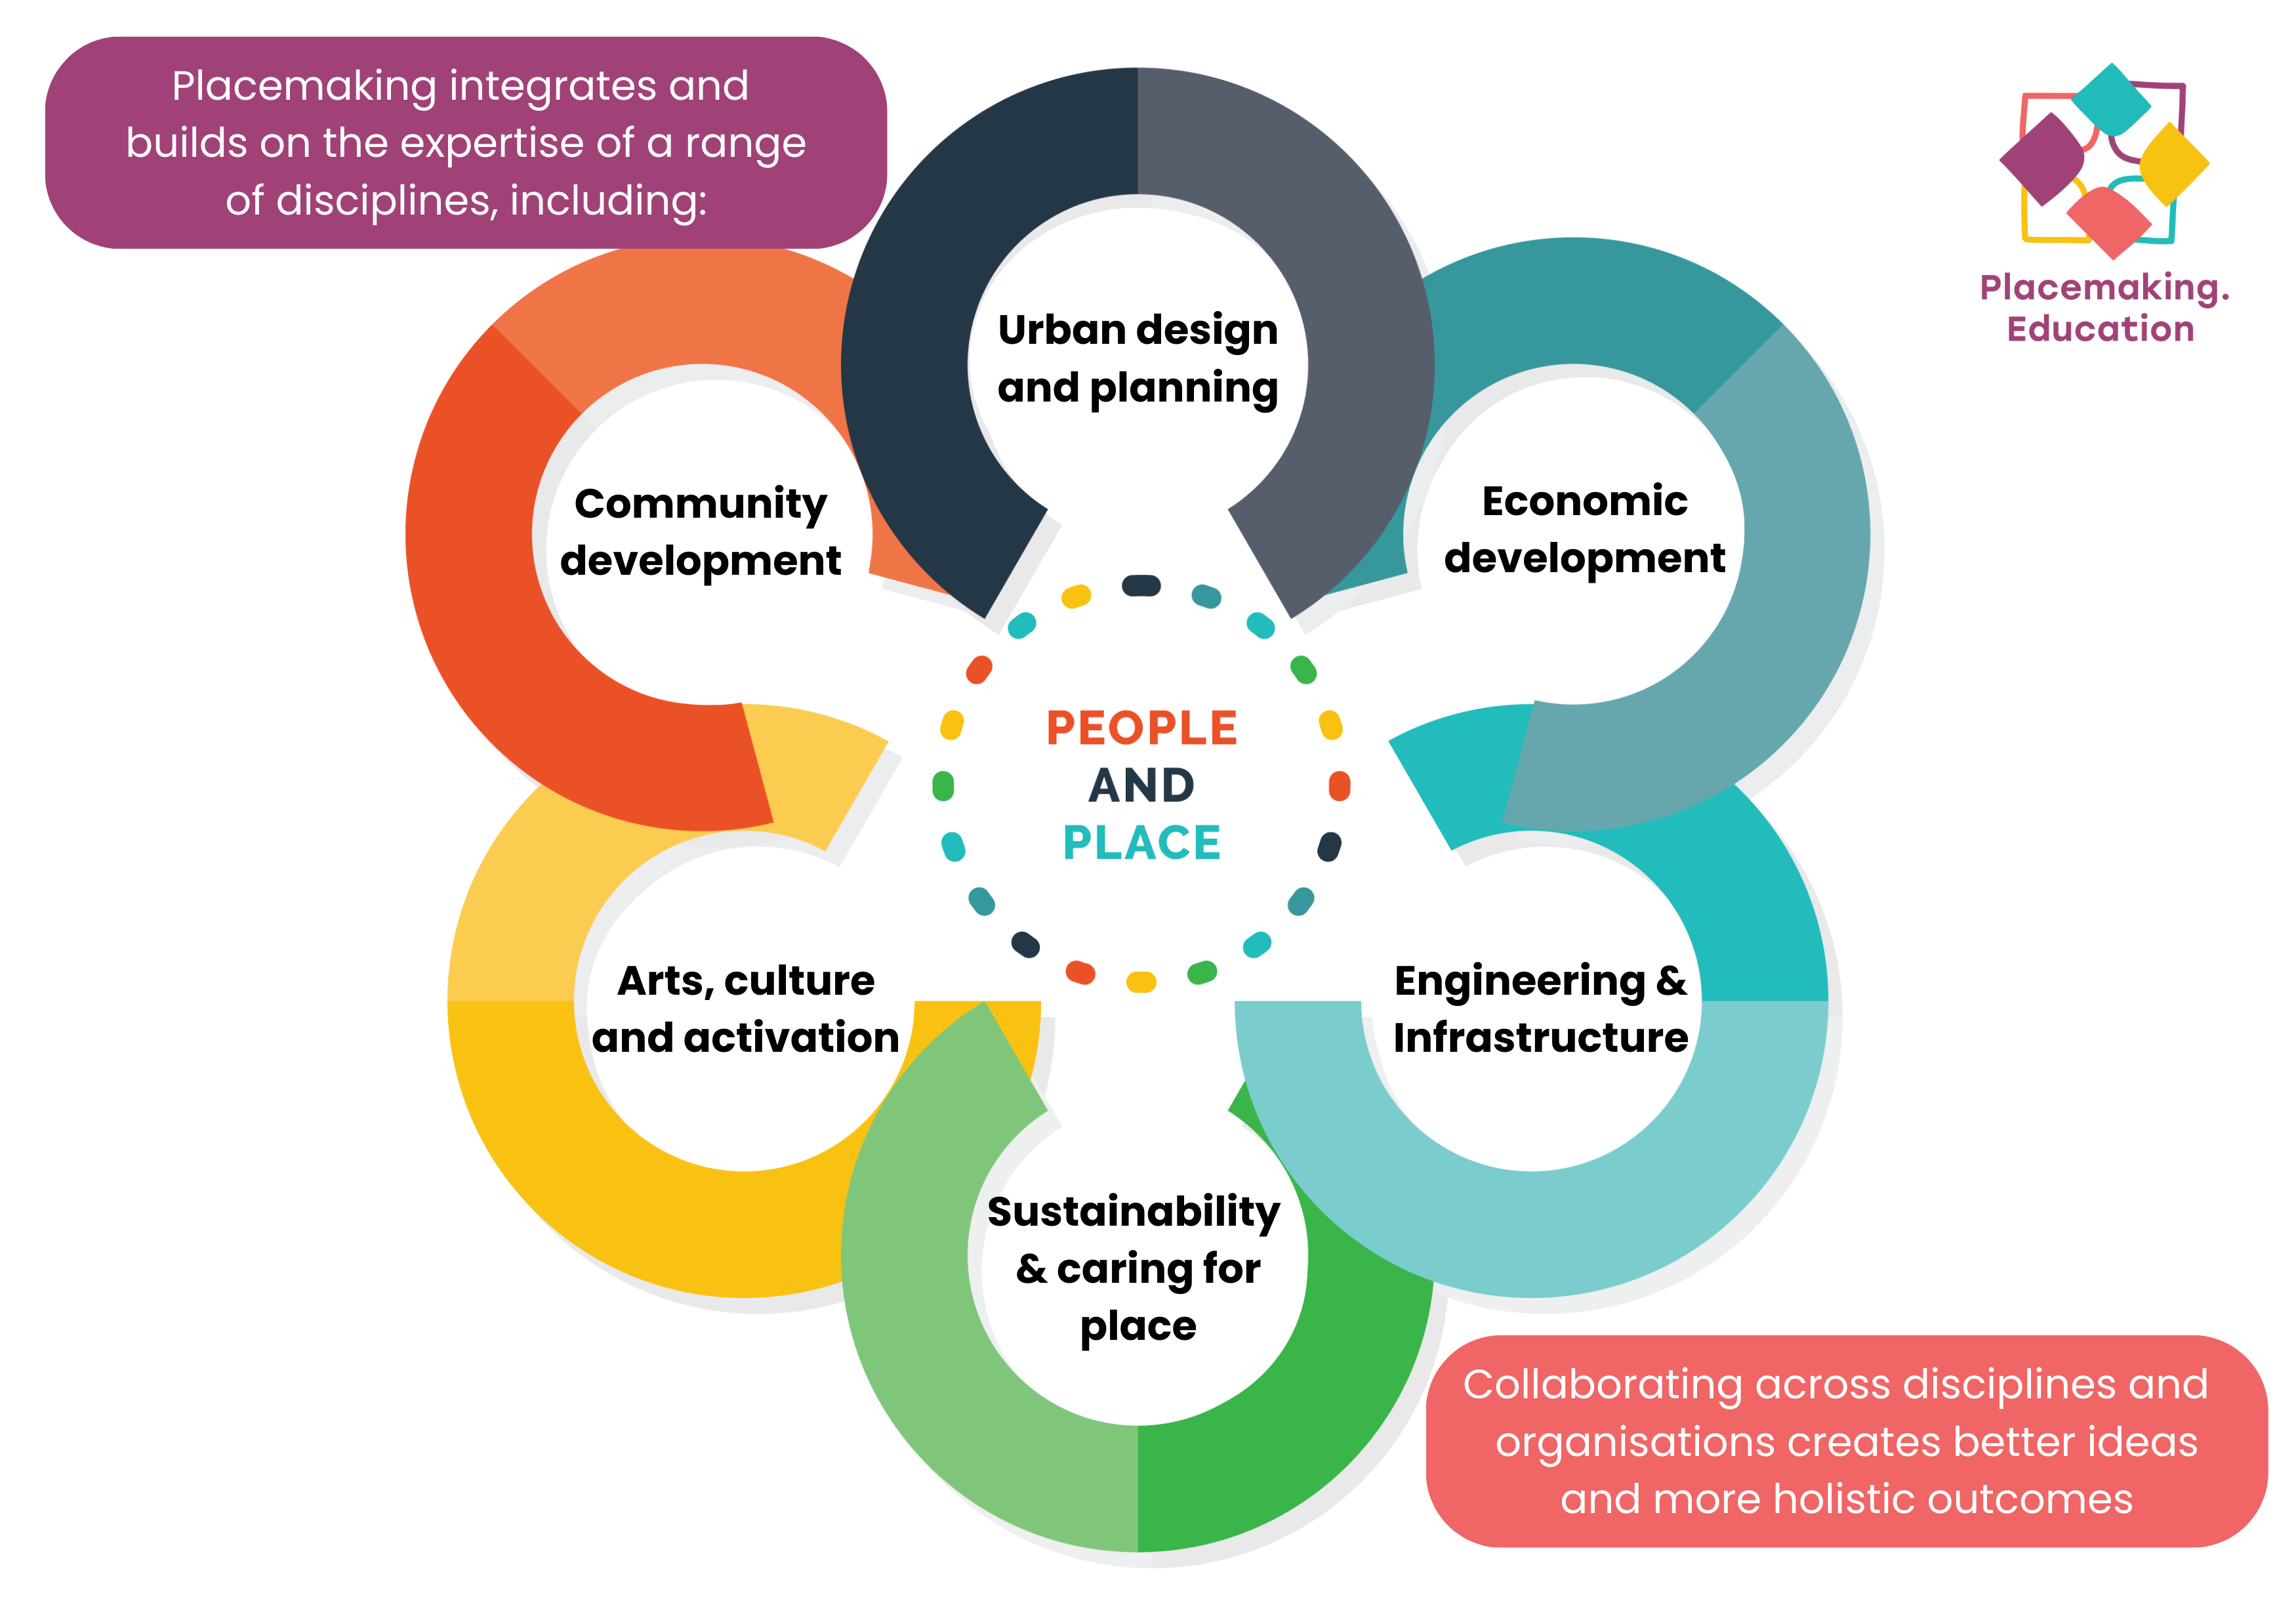 Graphic showing that placemaking integrates and builds on the expertise of a range of disciplines, including, urban design, urban planning, economic development, engineering, infrastructure, sustainability, arts, culture and community development